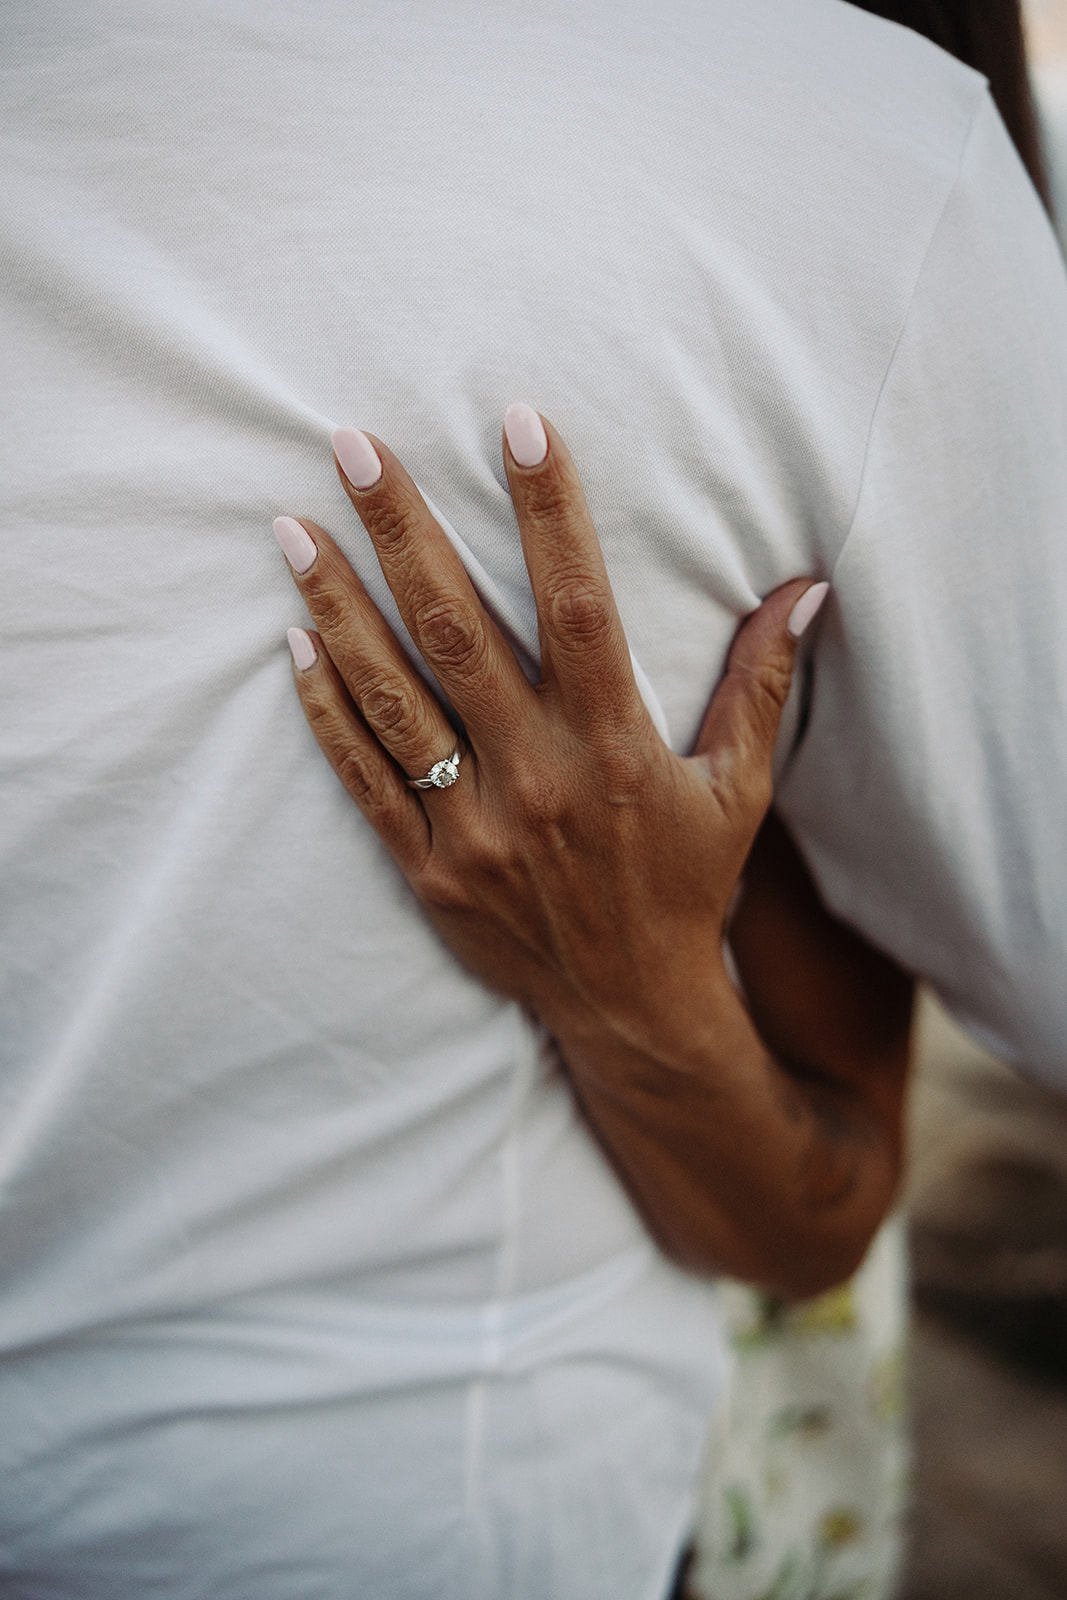 Woman's hand holding man's back showing her engagement ring